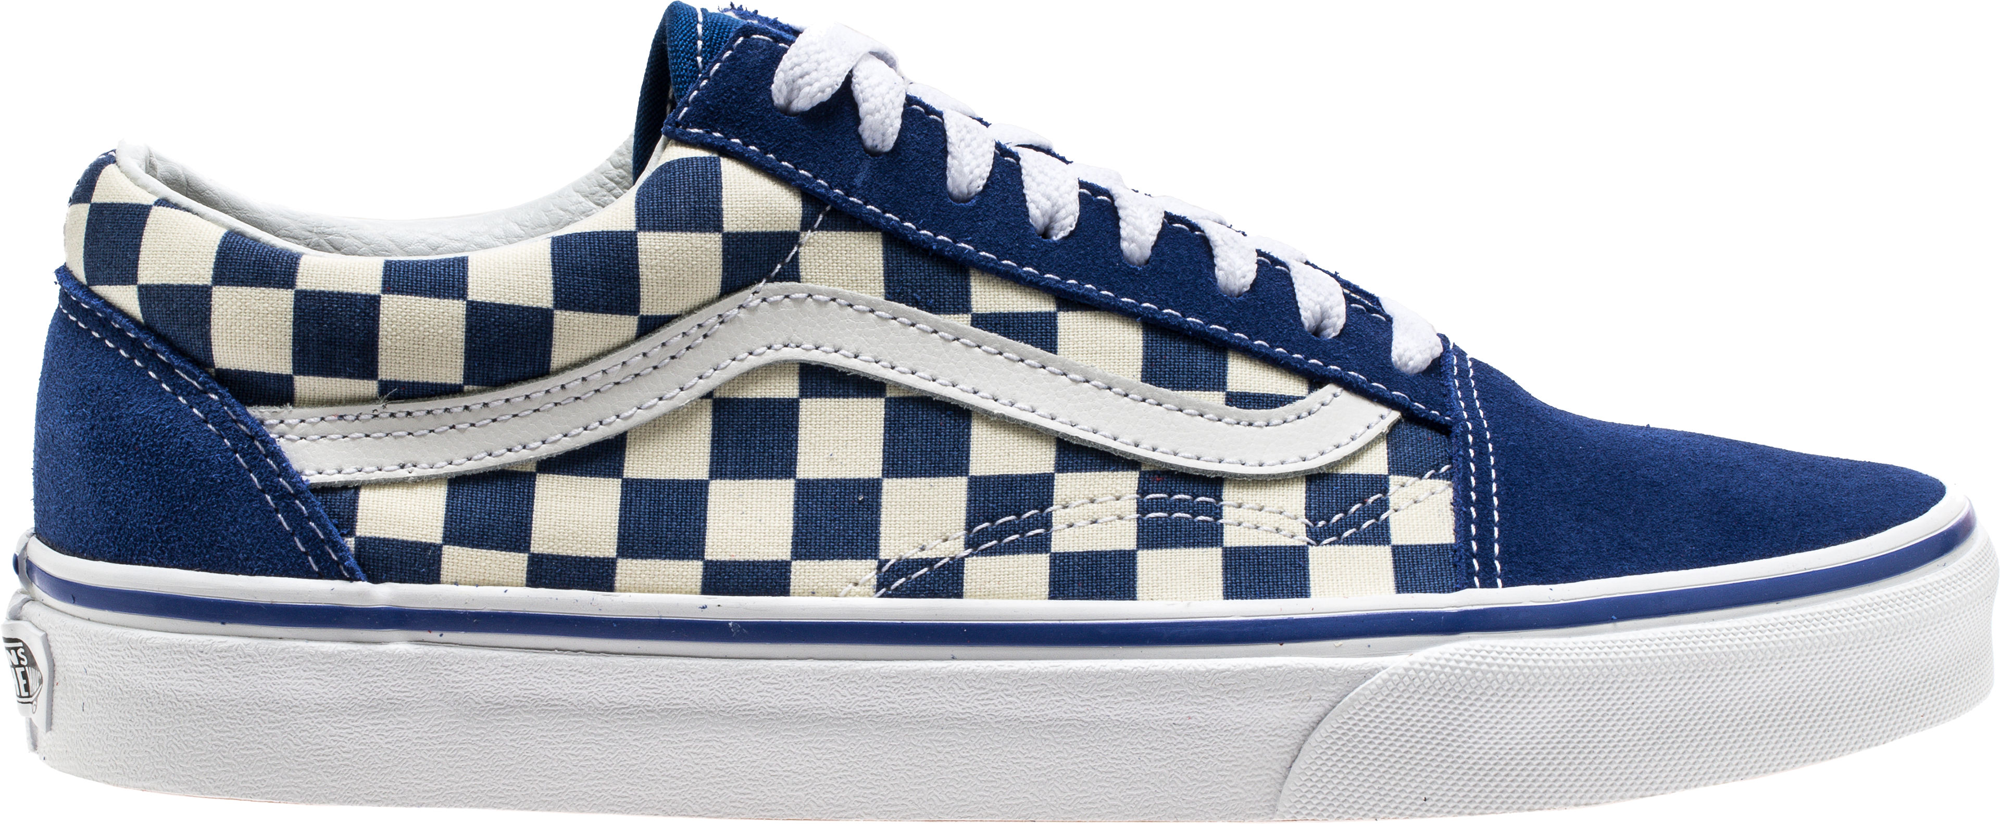 vans shoes checkered blue